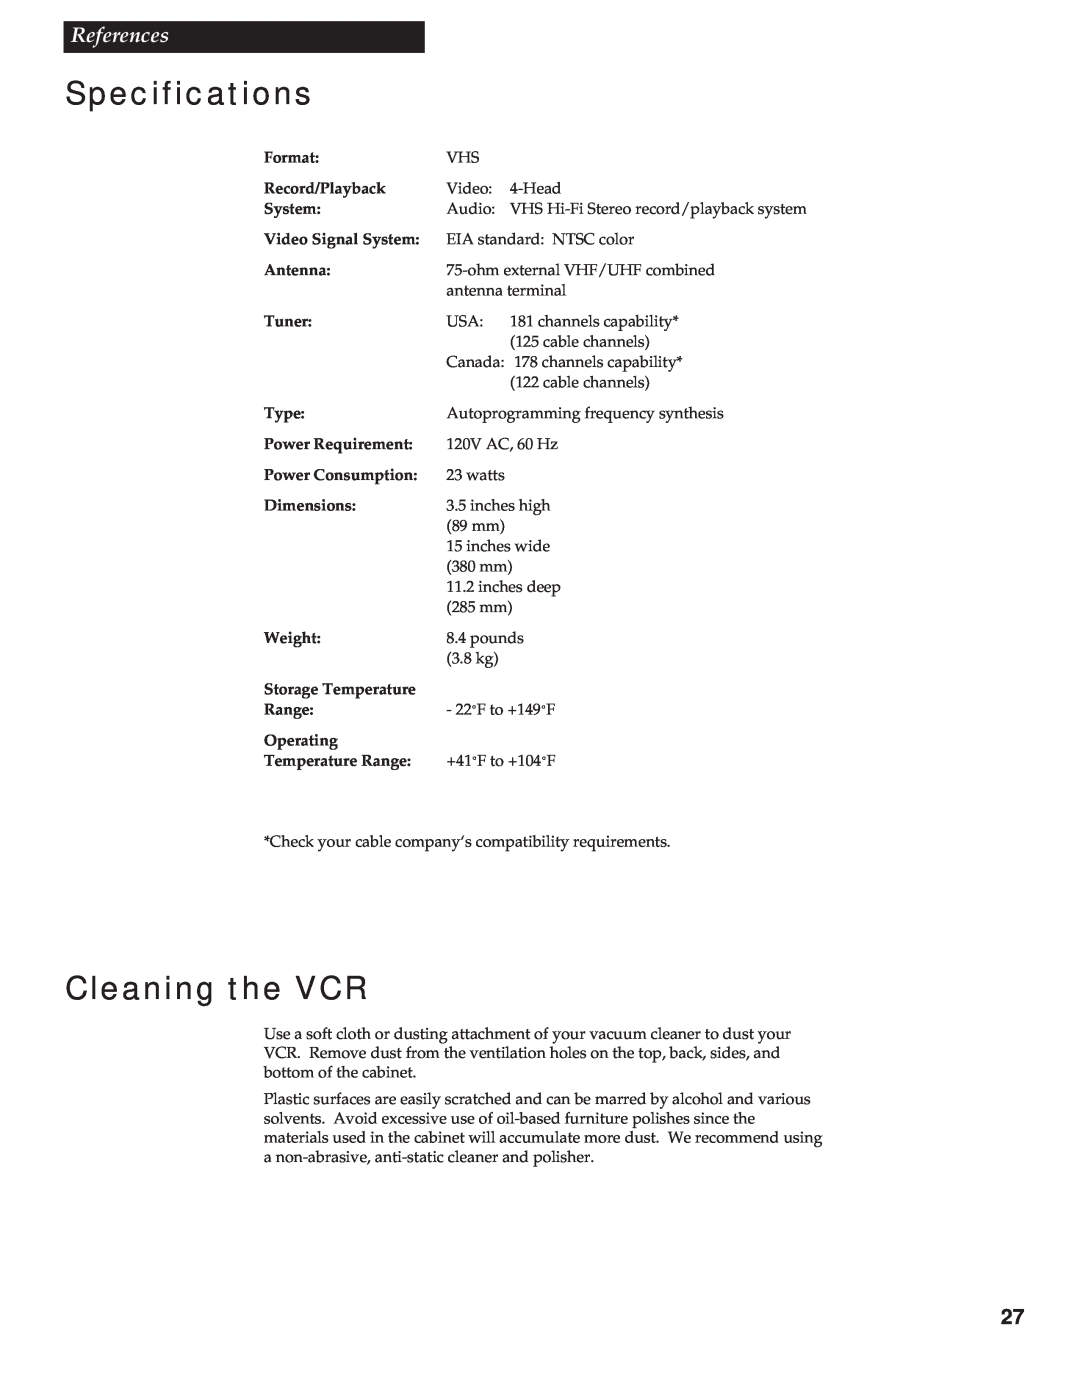 RCA VR602HF Specifications, Cleaning the VCR, References, Format, Record/Playback, Video Signal System, Antenna, Tuner 